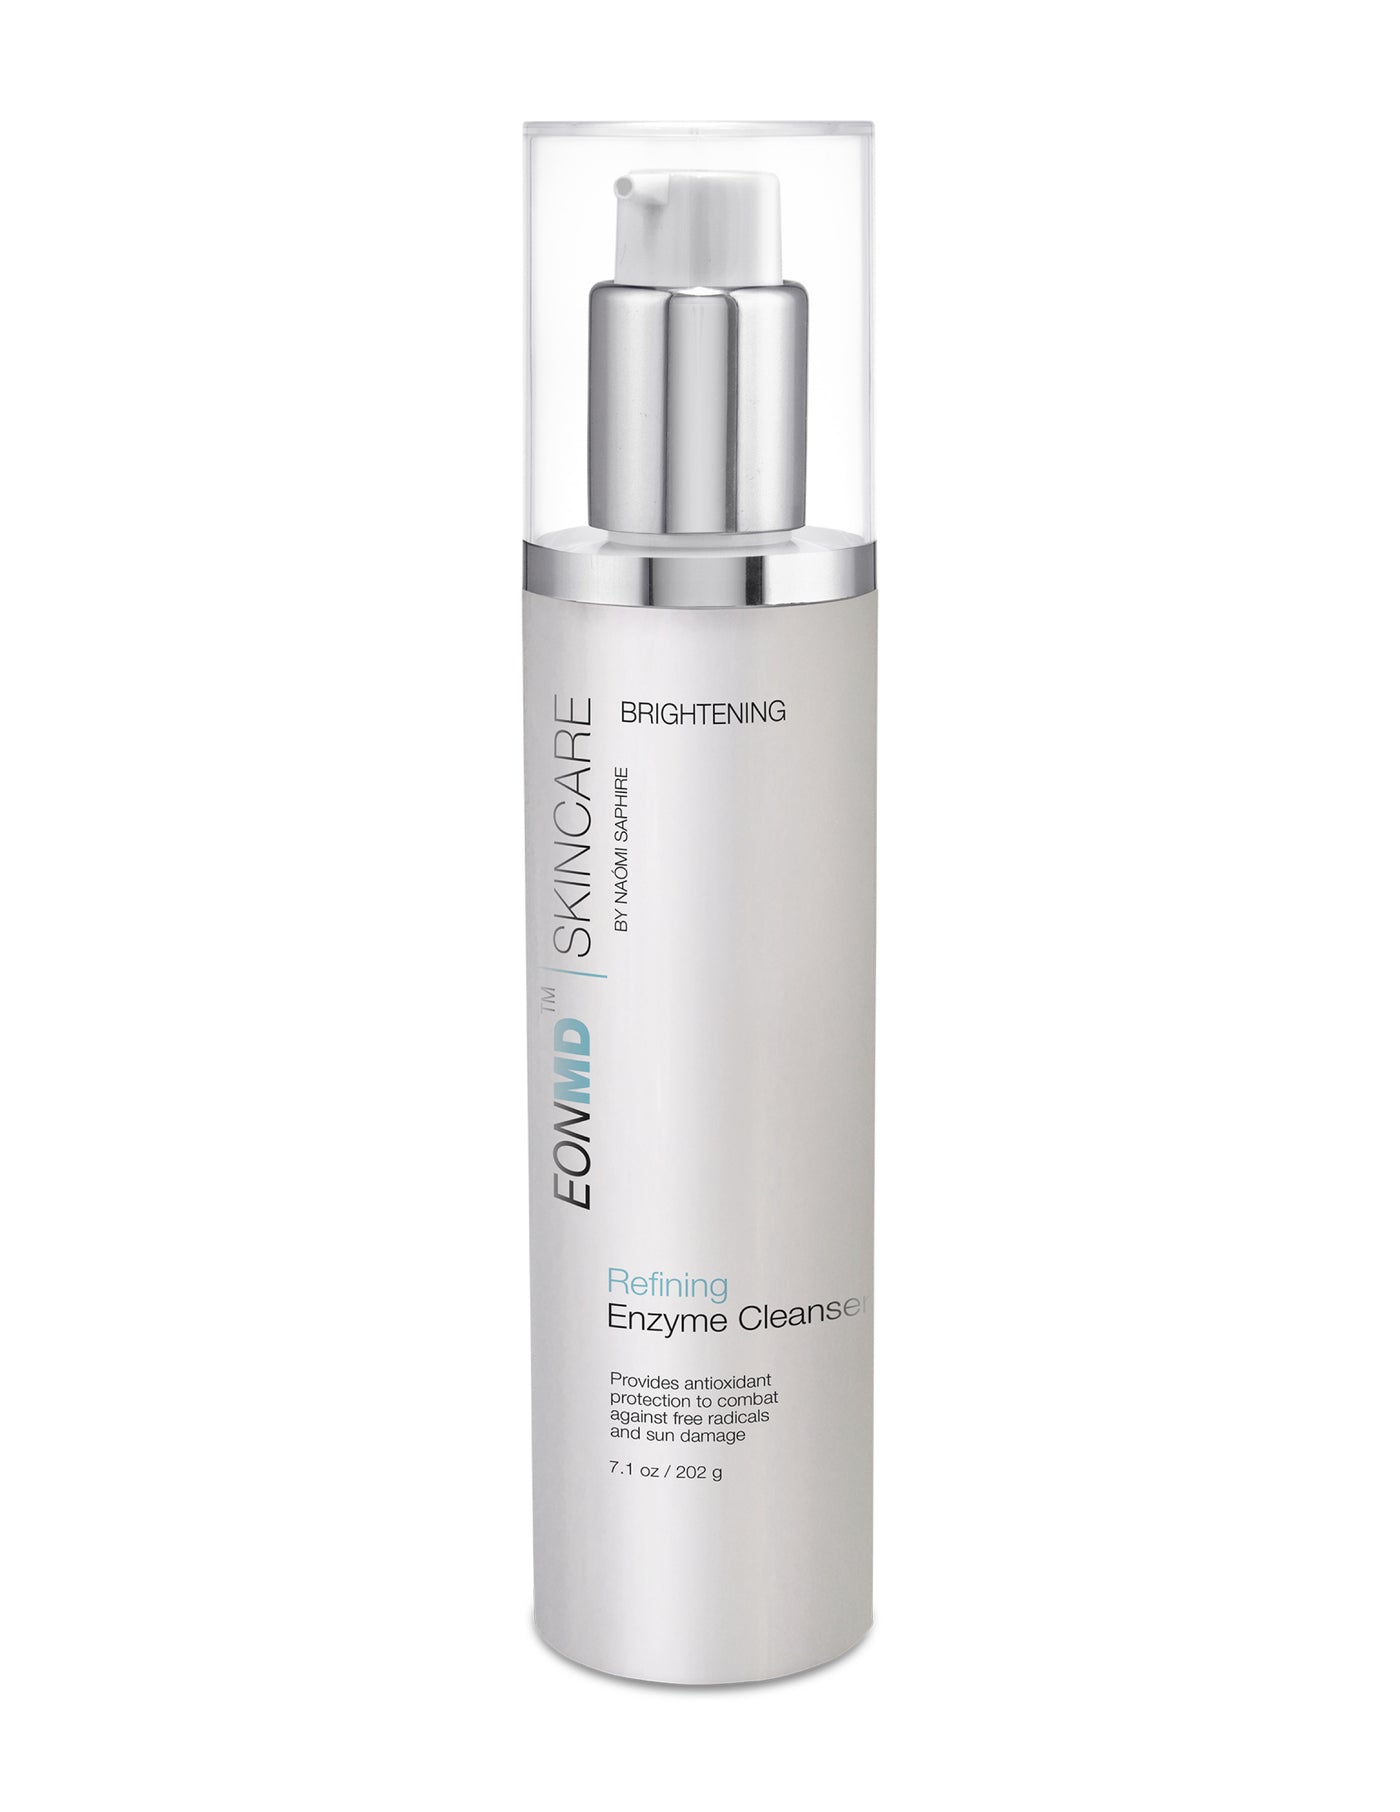 Formulated without parabens or sulfates, this cleanser is gentle enough for daily use, while being active enough to deliver skin brightening benefits to virtually all skin types. The combination of Papaya Enzymes and Salicylic Acid works to slough away dead skin cells. It effectively removes makeup and impurities found on the skin's surface, reviving dry and aging skin.